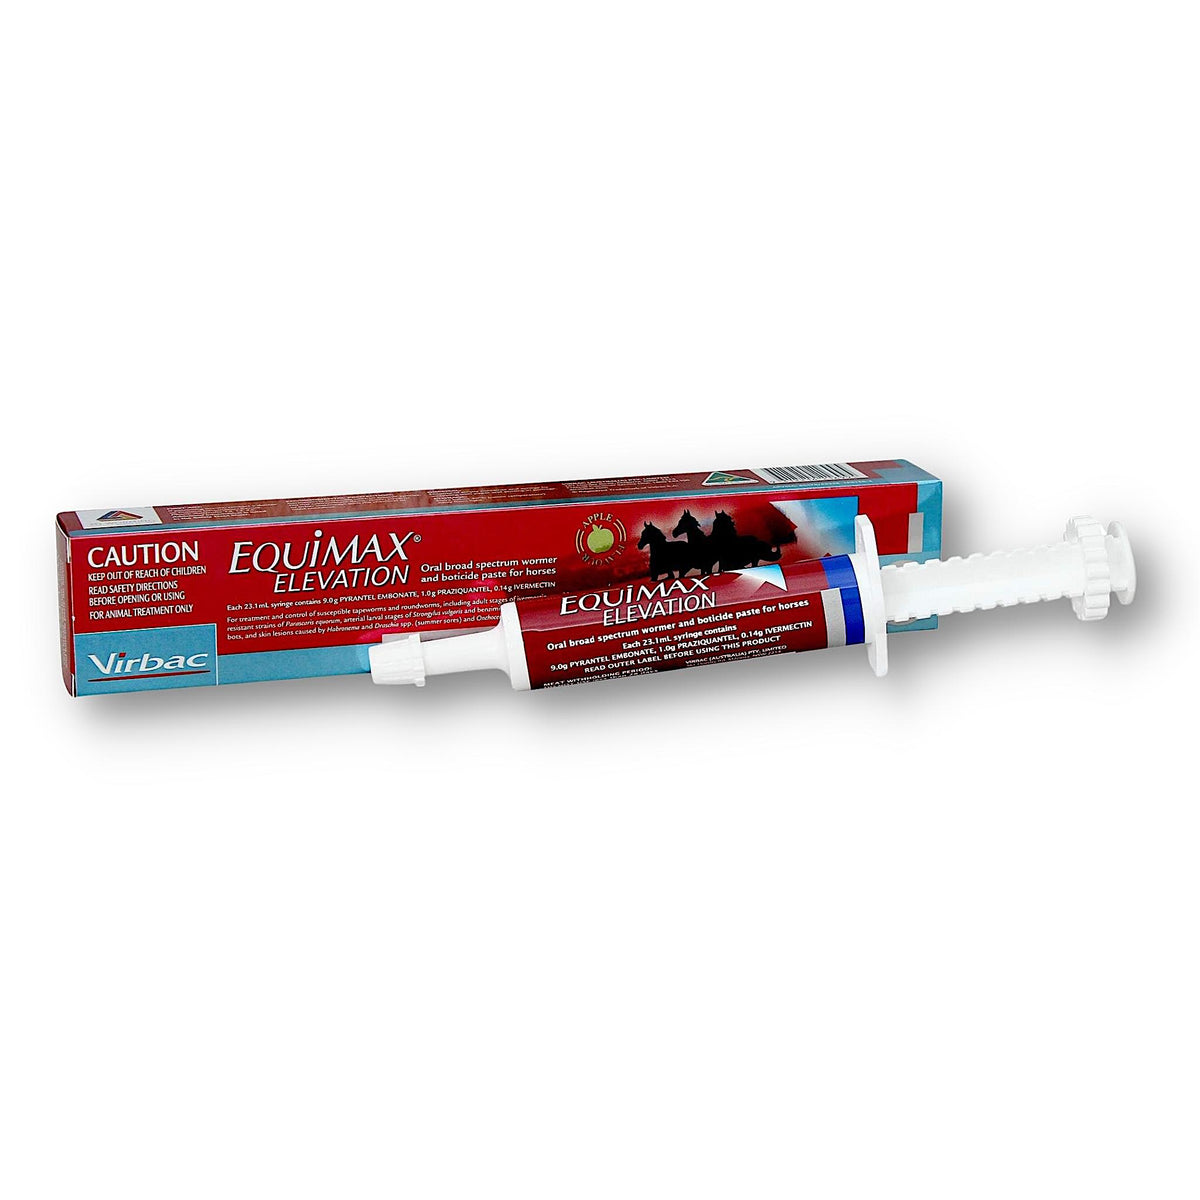 Syringe tube of product infront of its packaging, labels red in colour.